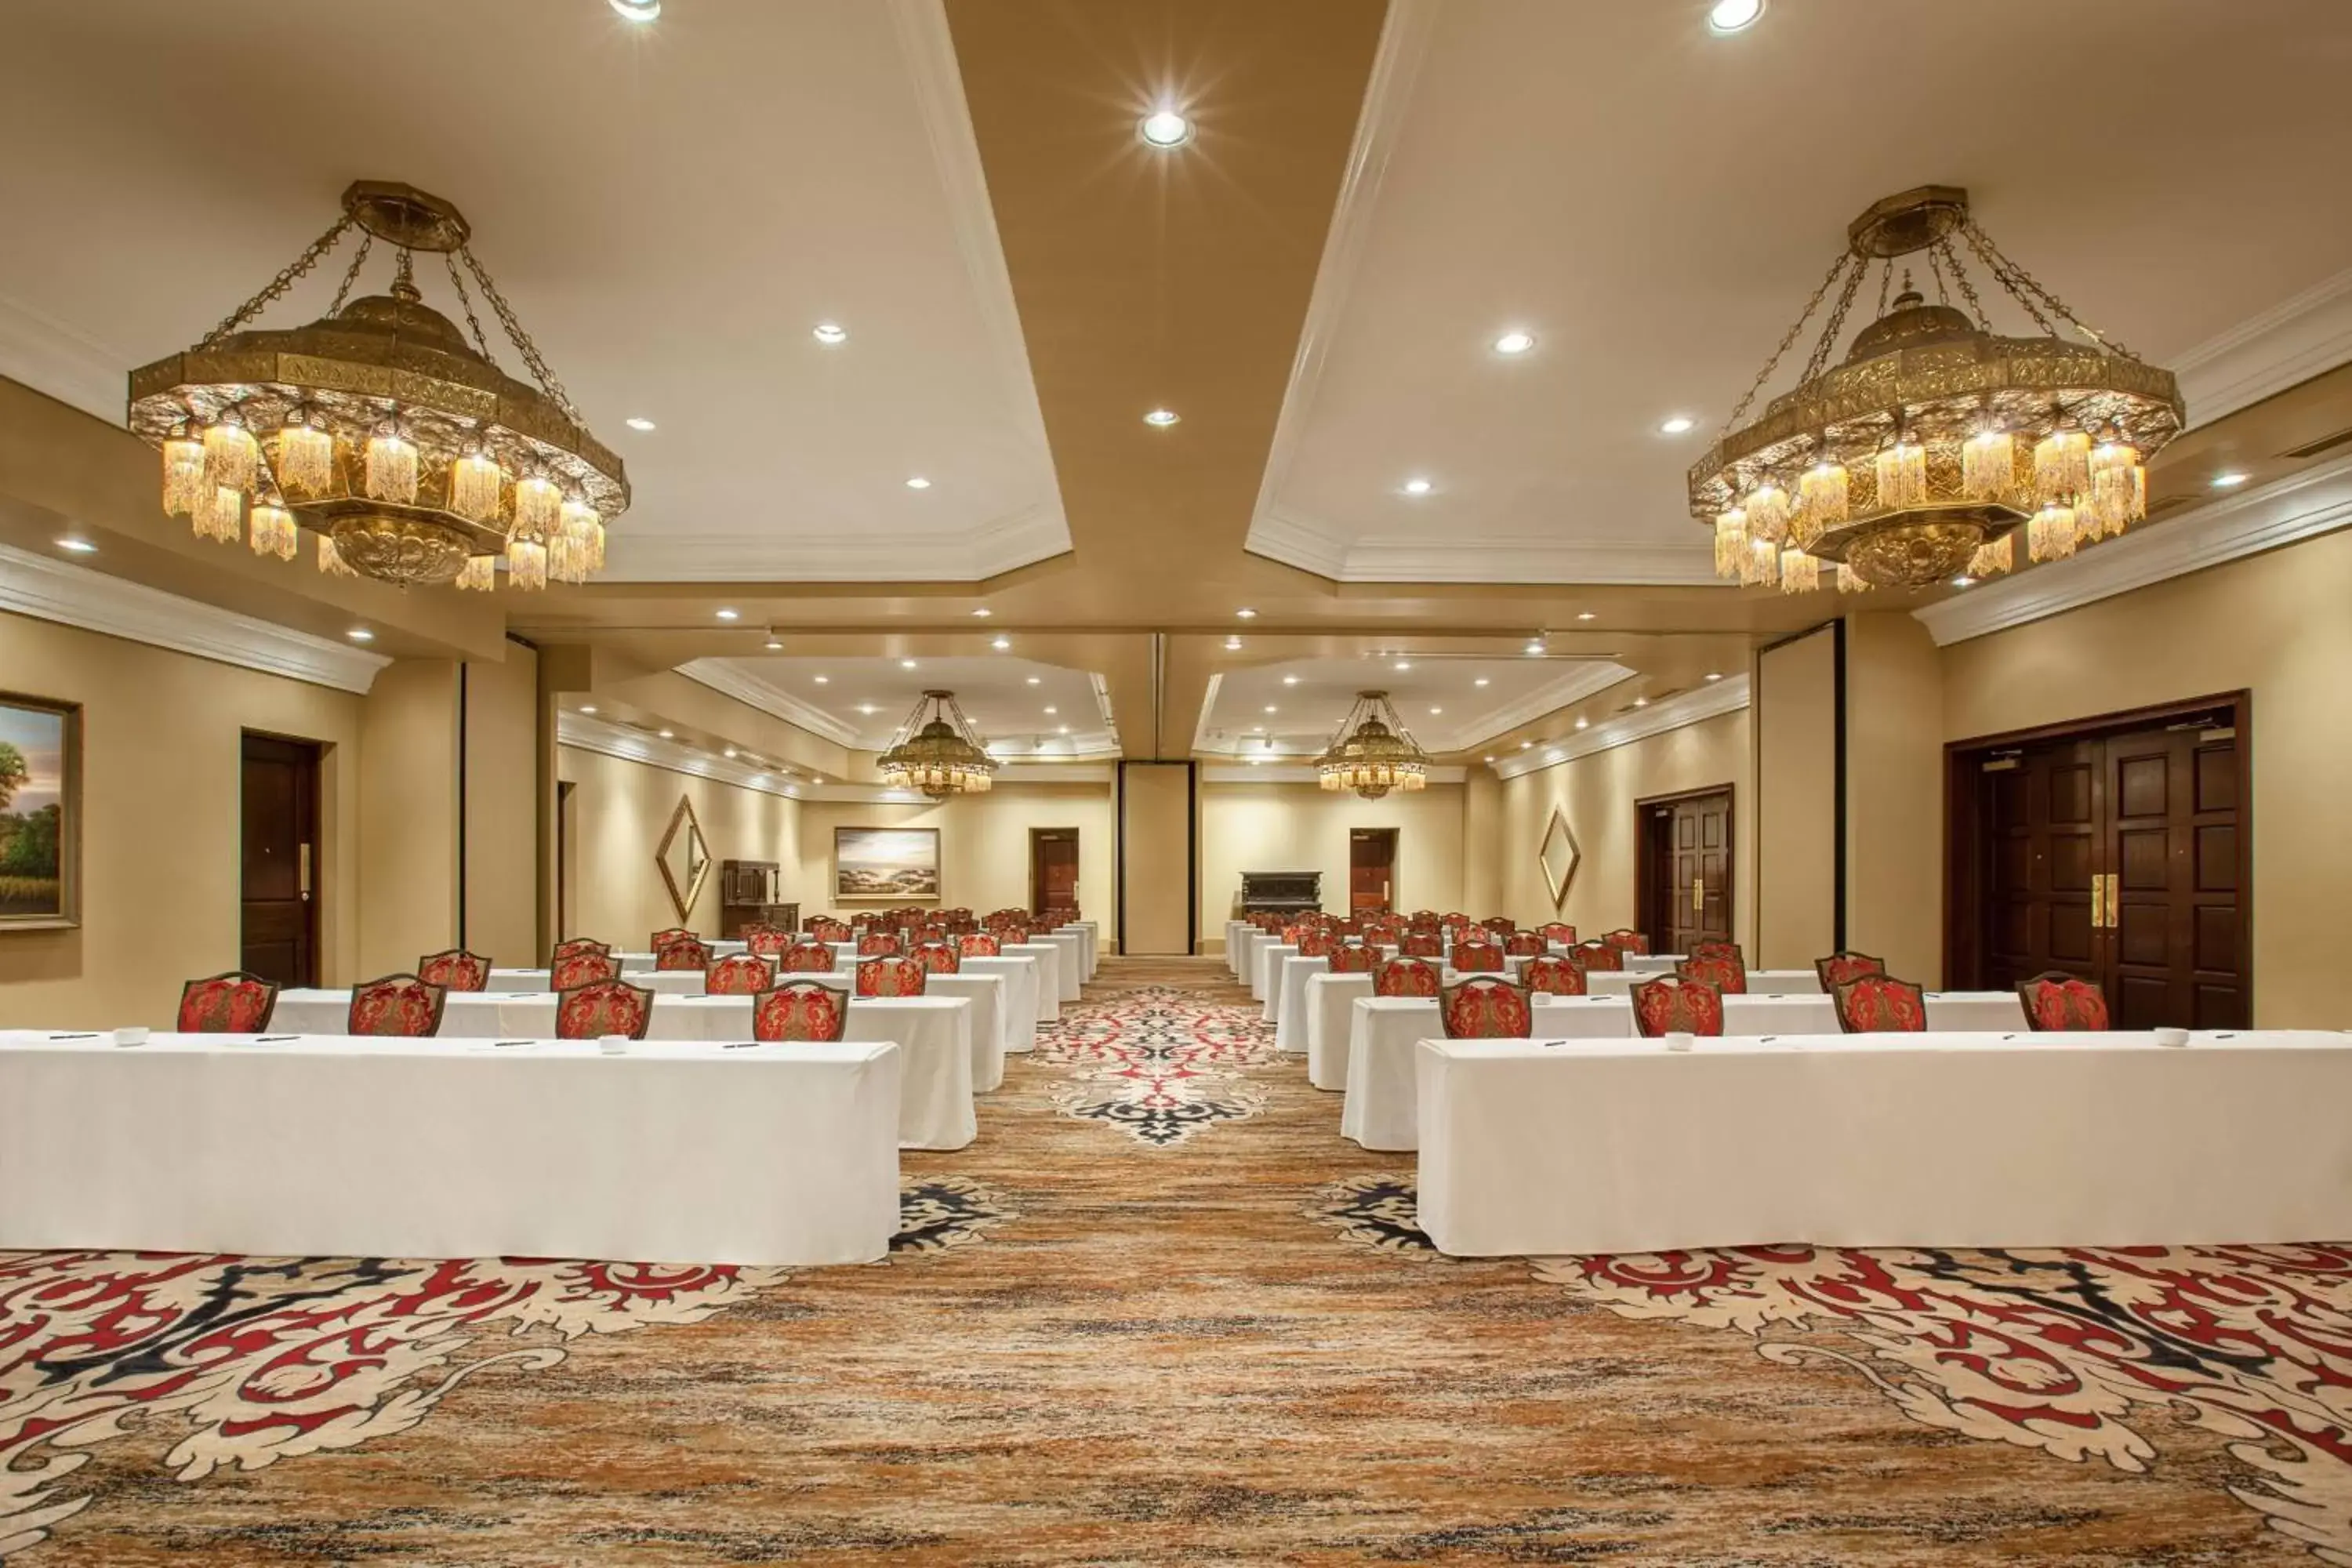 Meeting/conference room, Banquet Facilities in Casa Monica Resort & Spa, Autograph Collection